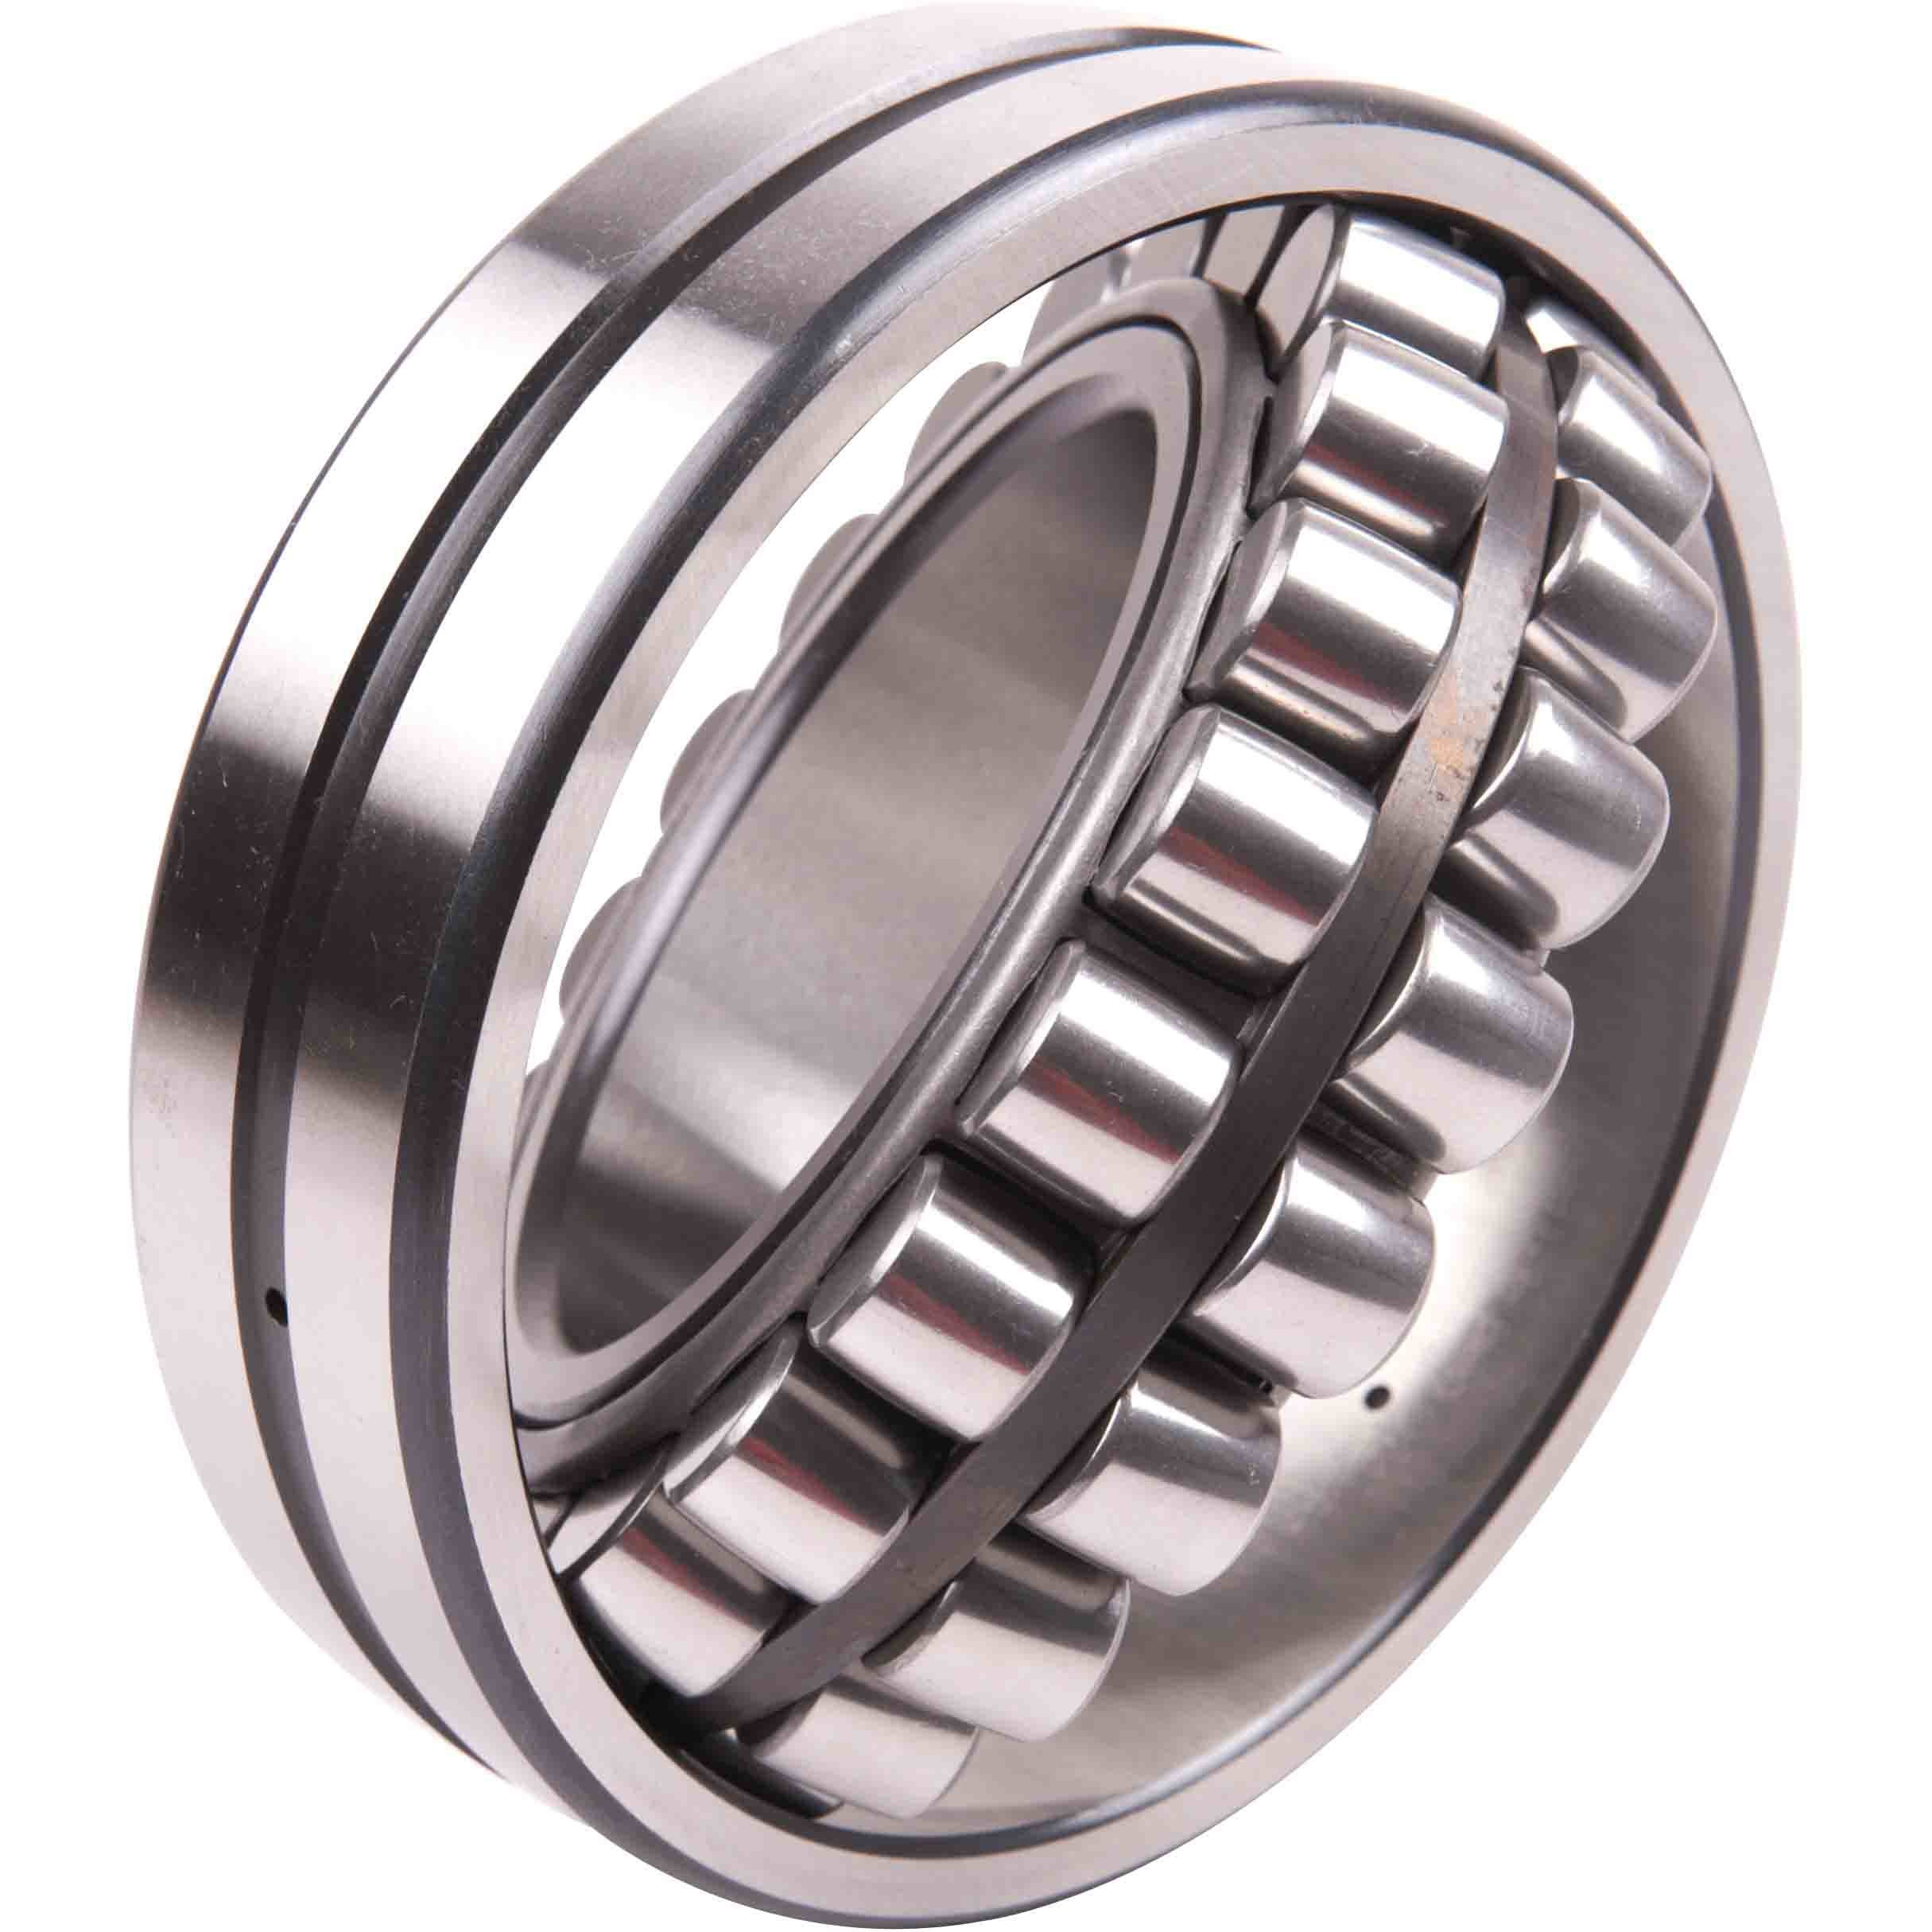 Quality PLC58-5 heavy duty spherical thrust roller bearing manufacturers for sale